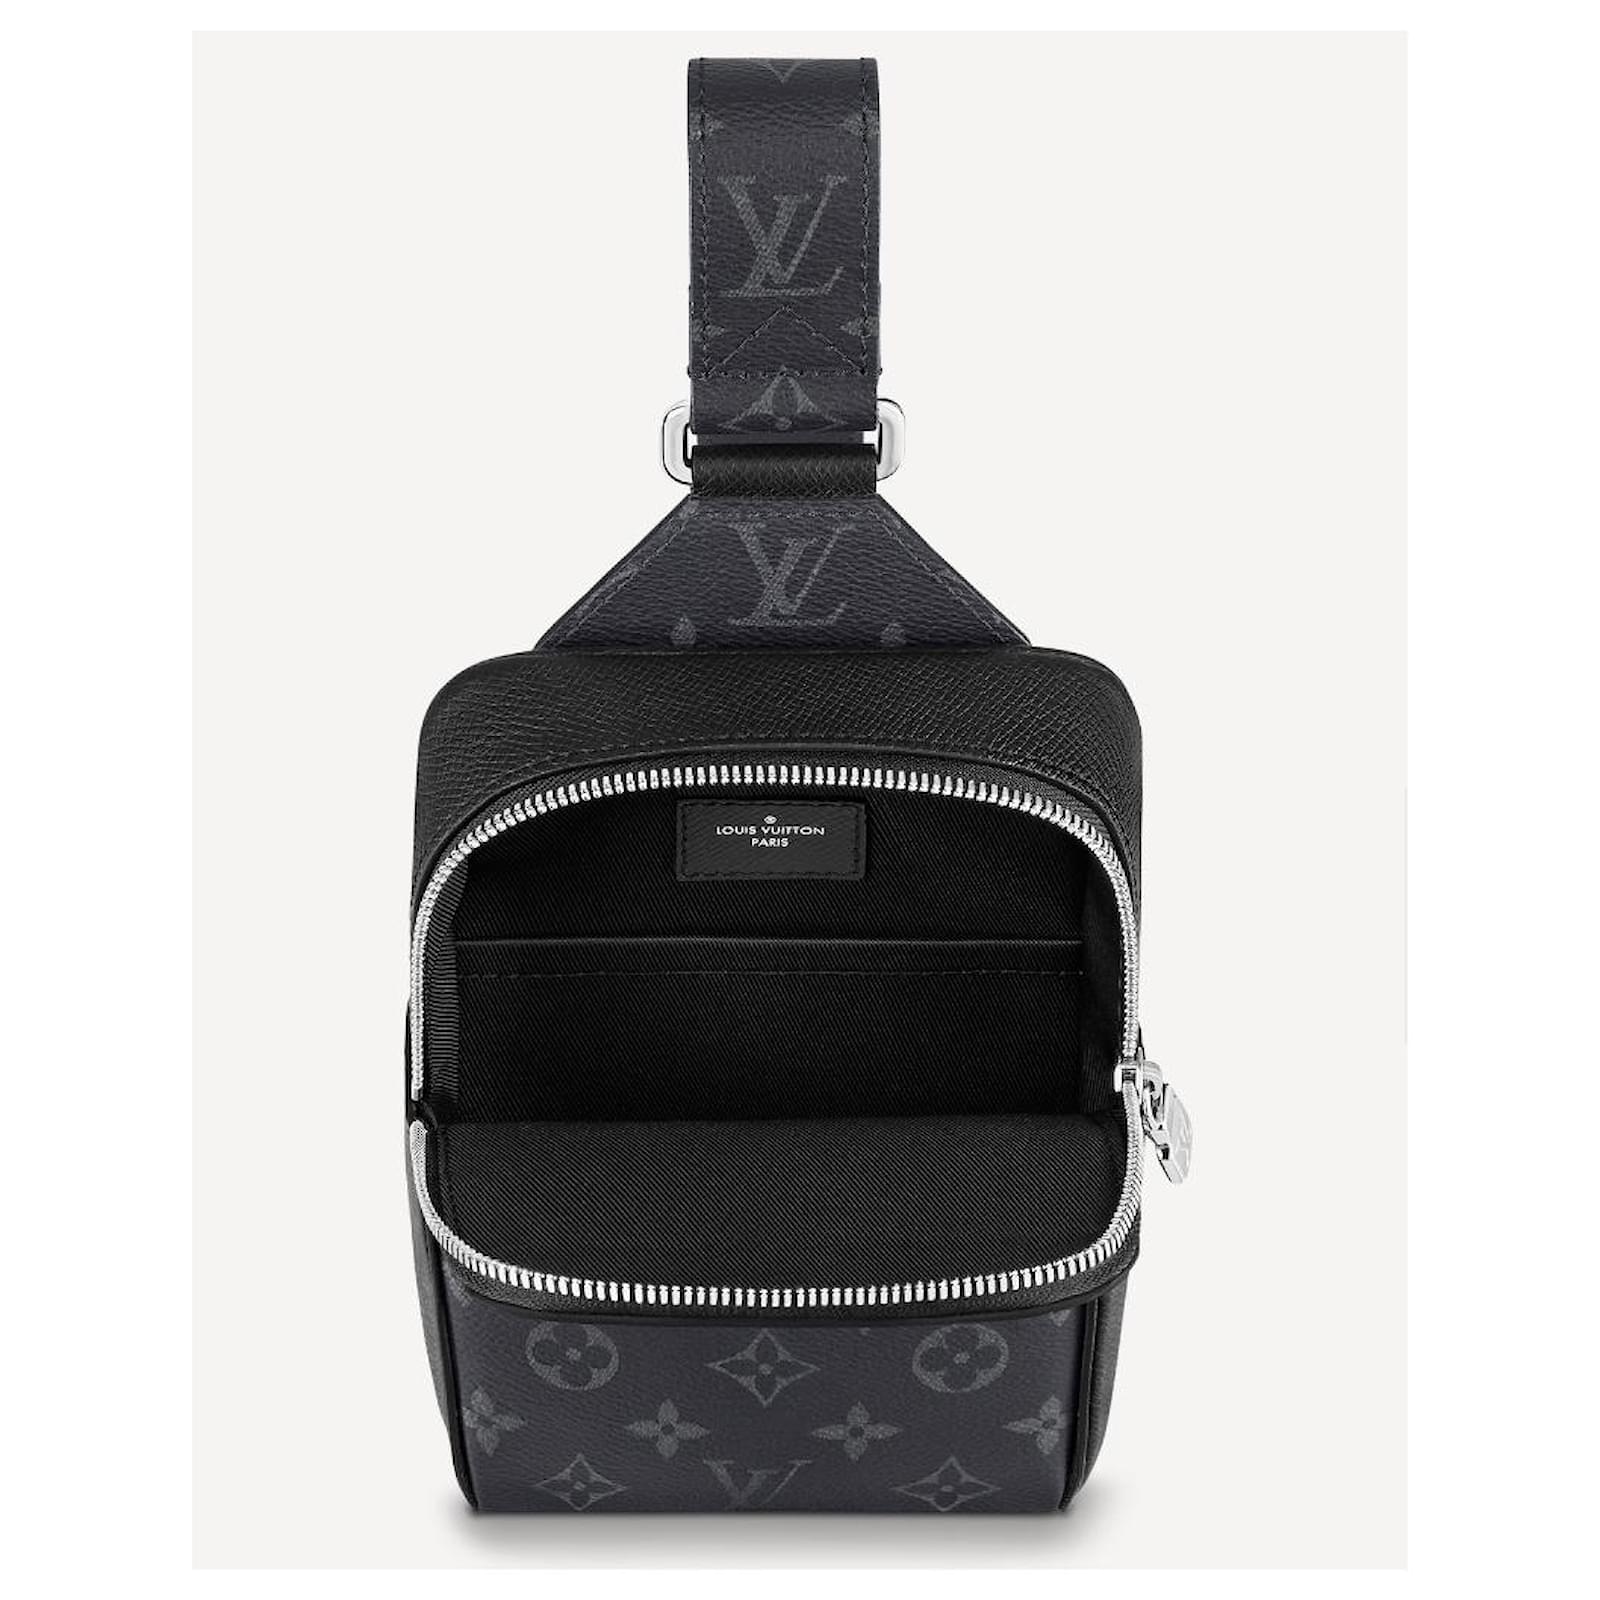 Louis+Vuitton+Outdoor+Sling+Bag+Gray+Canvas for sale online